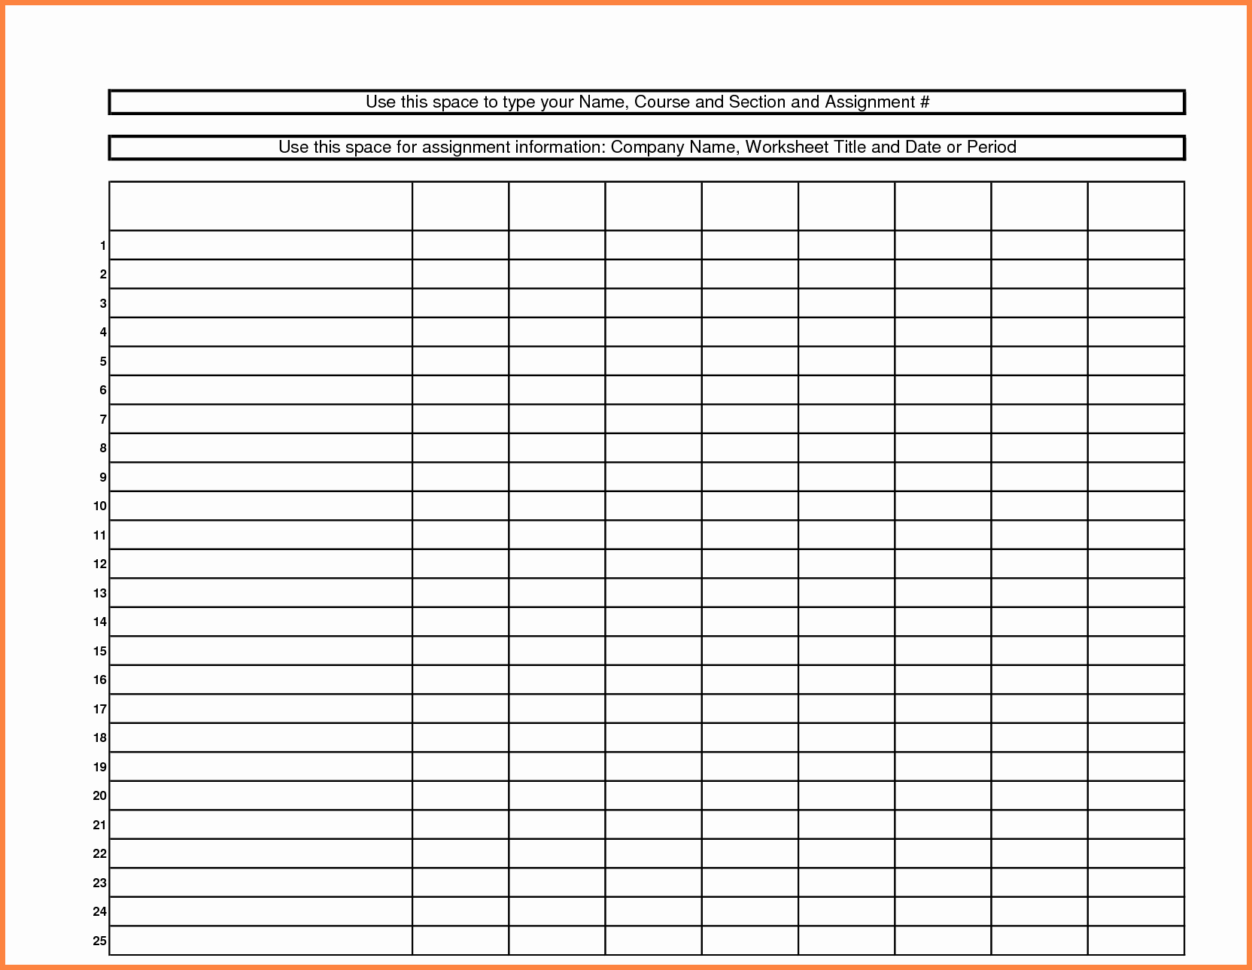 50-lovely-blank-spreadsheet-with-gridlines-document-ideas-in-blank-spreadsheets-db-excel